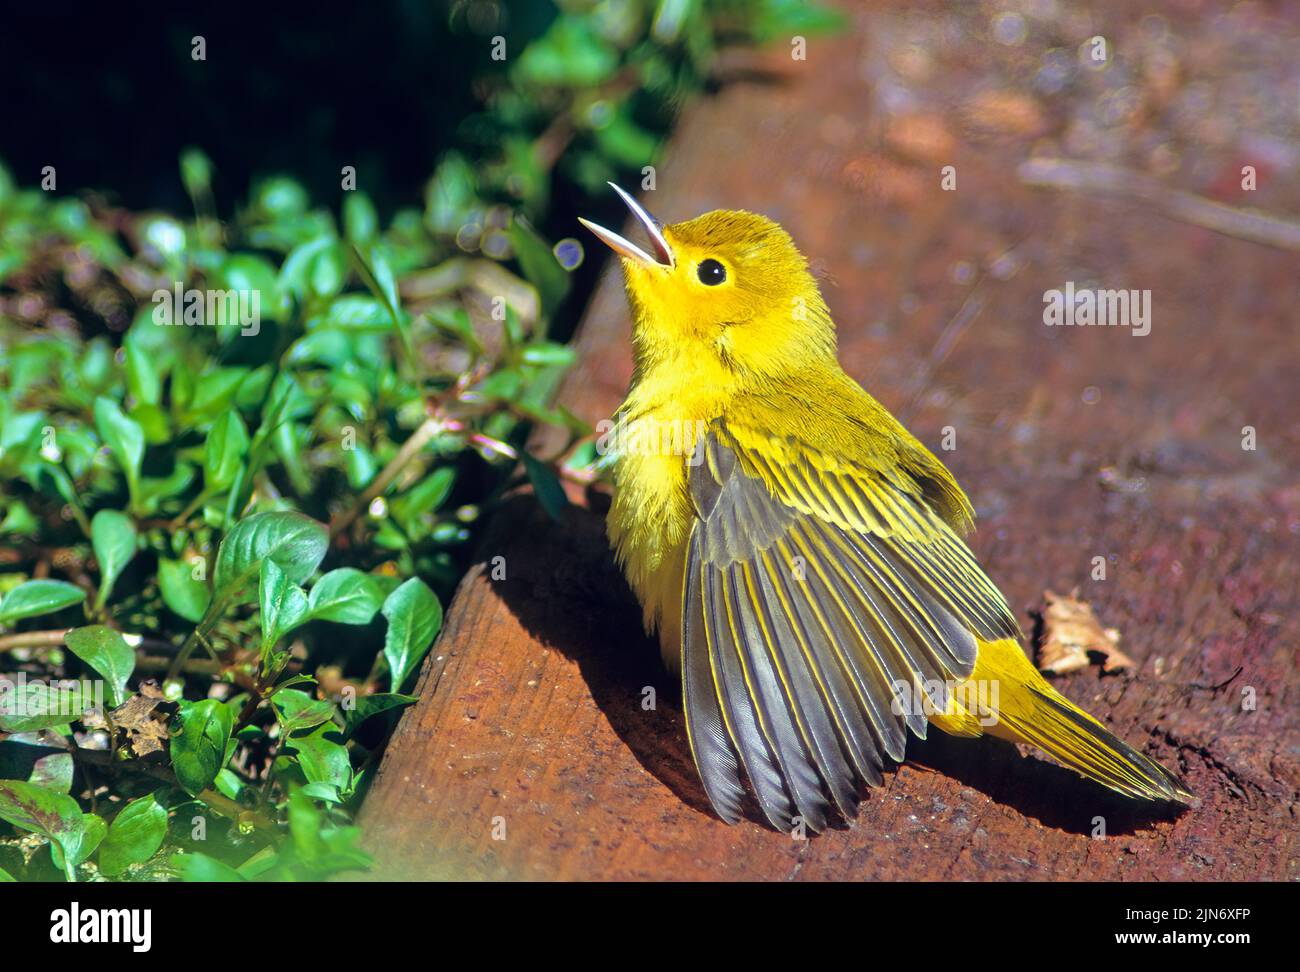 Yellow warbler vocalizing Stock Photo